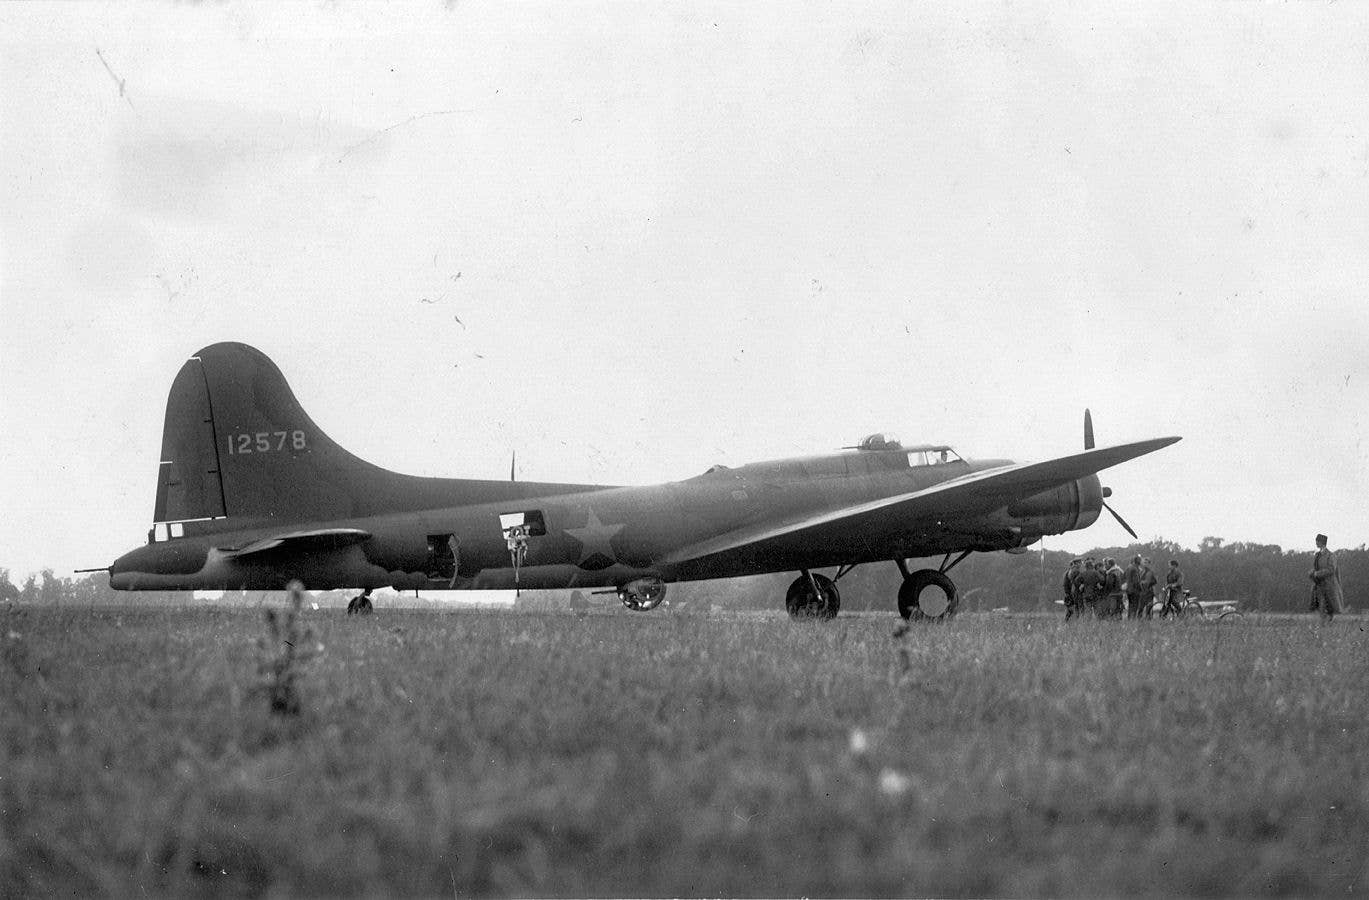 message-editor%2F1625763261576-97th_bombardment_group_b-17e_flying_fortress_41-2578.jpg